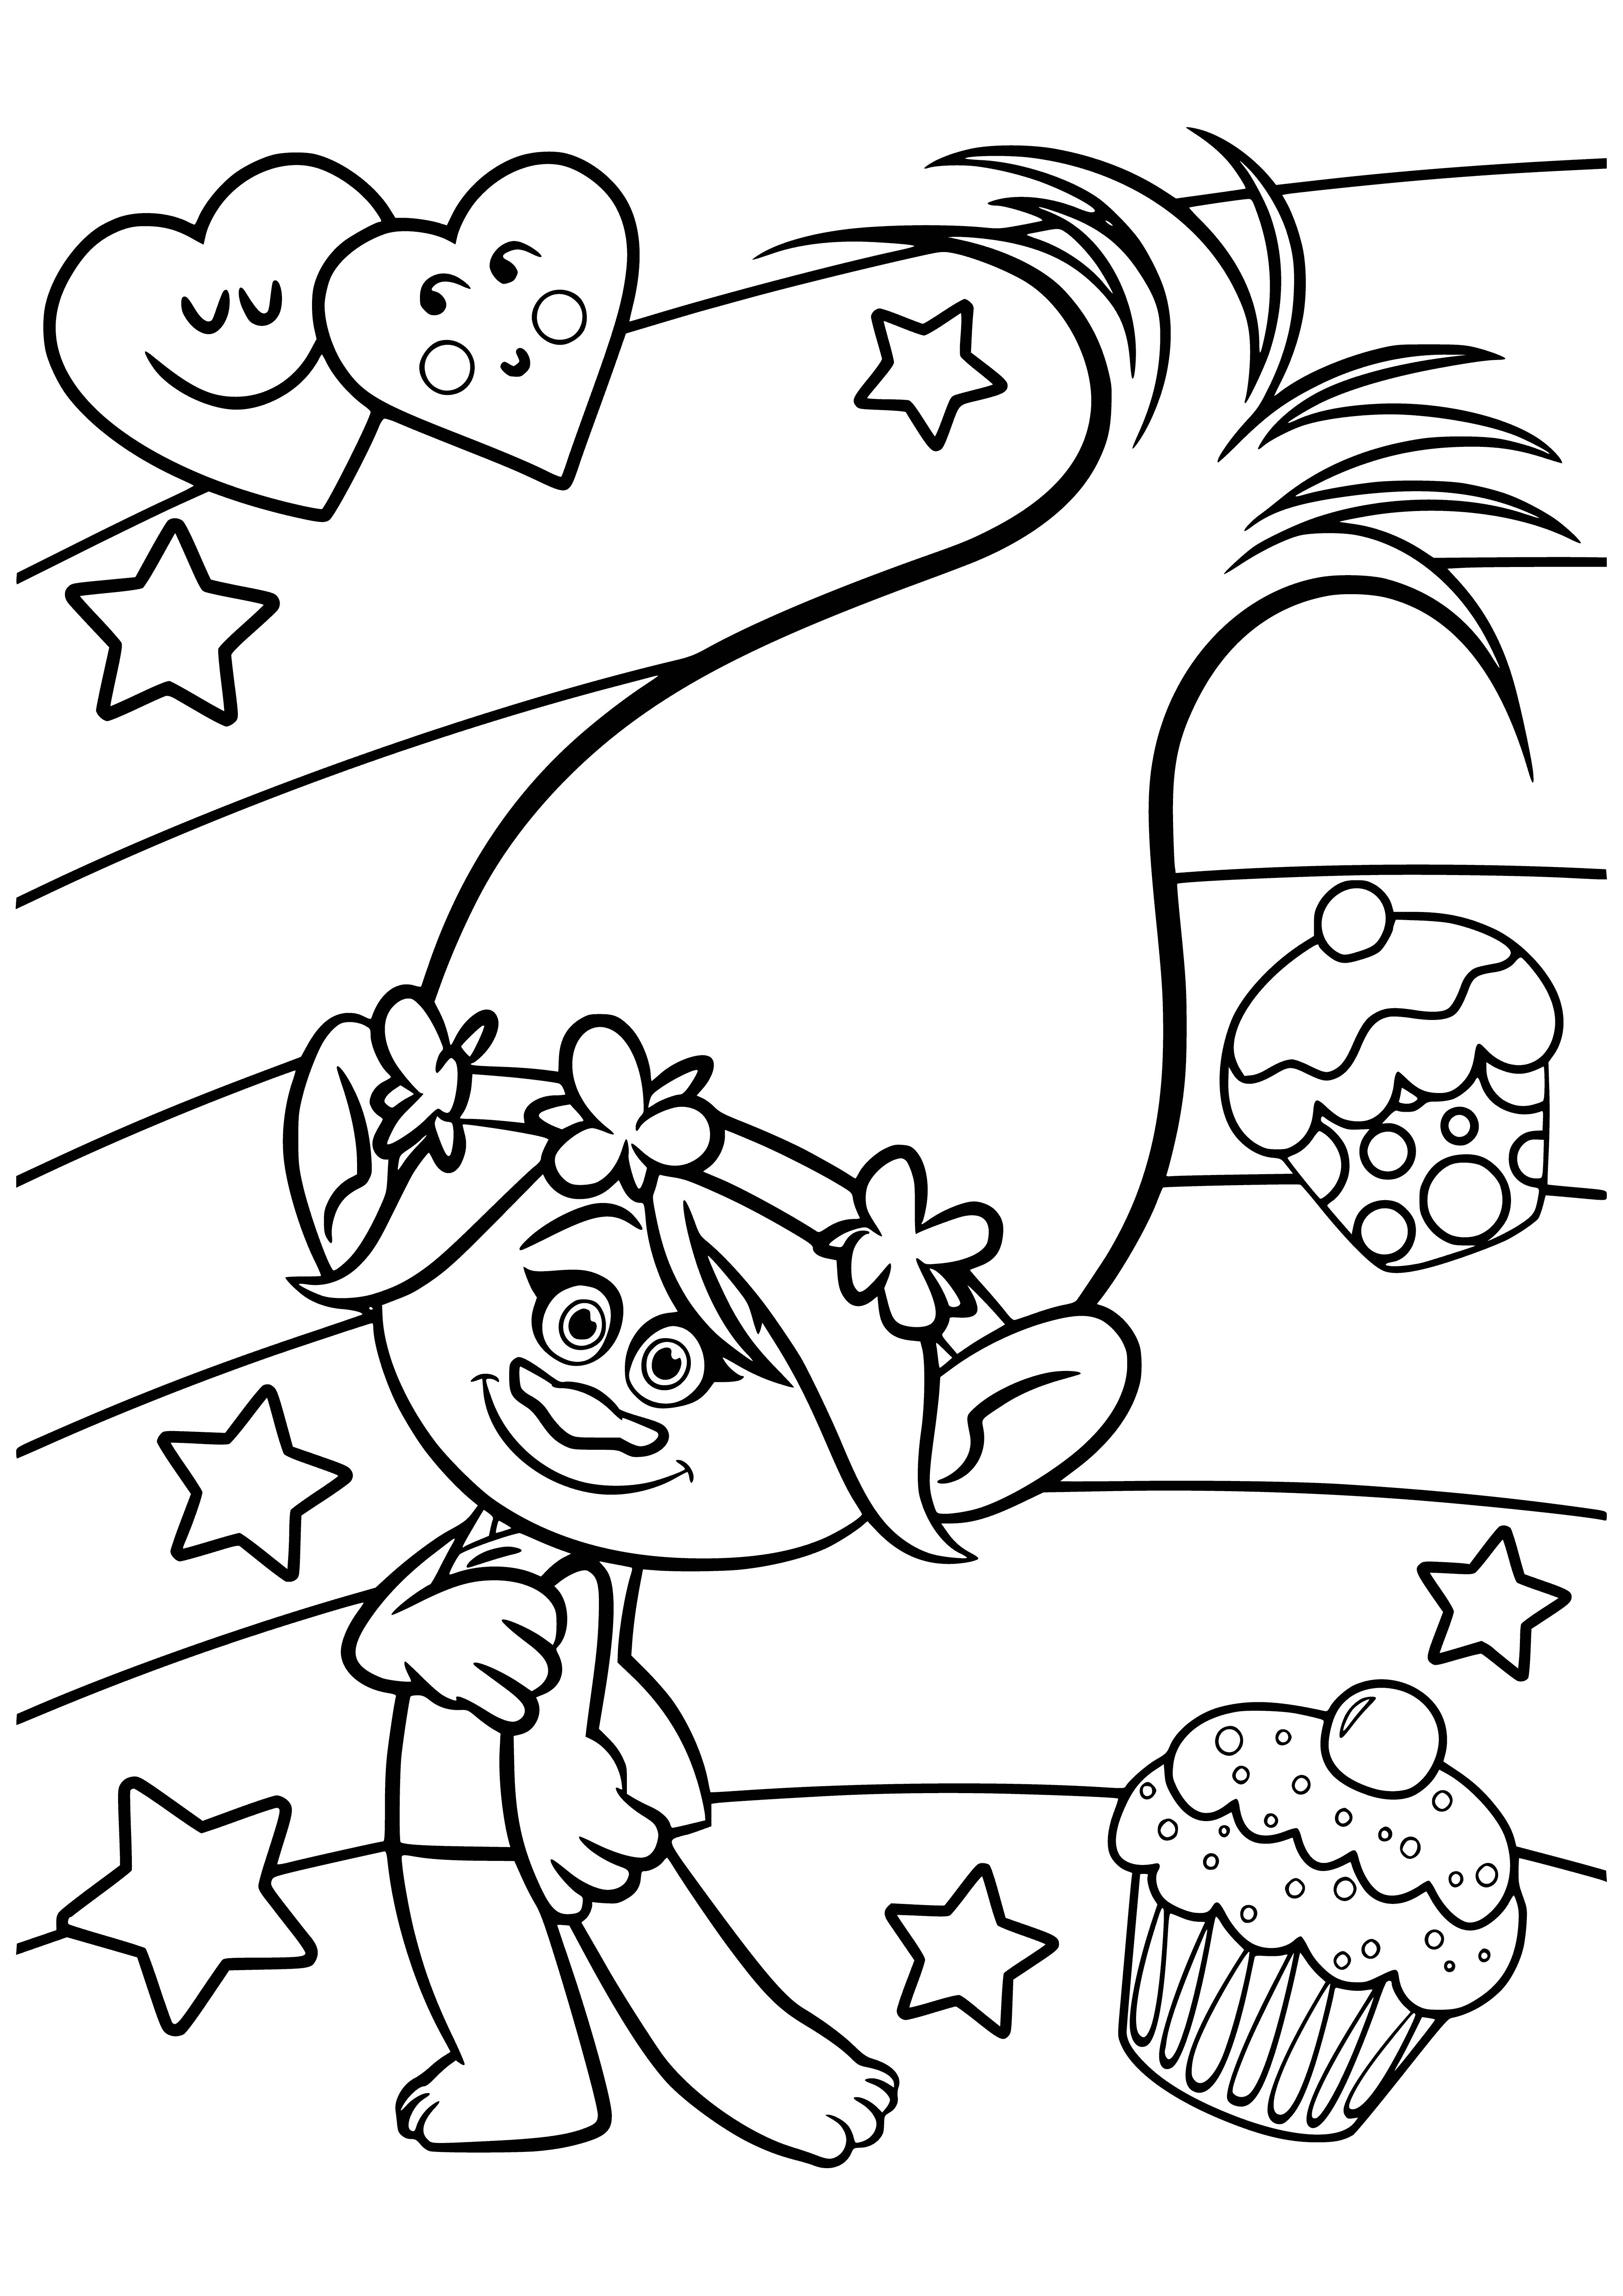 coloring page: Pink-skinned troll with light brown hair, two horns, pink dress, black belt and shoes.